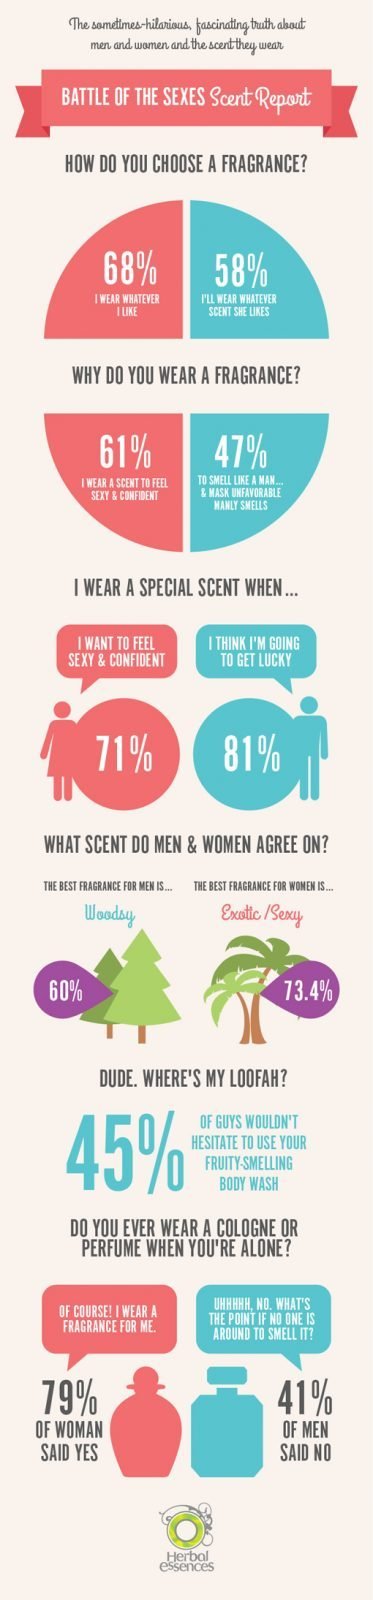 Battle-Of-The-Sexes-Infographic